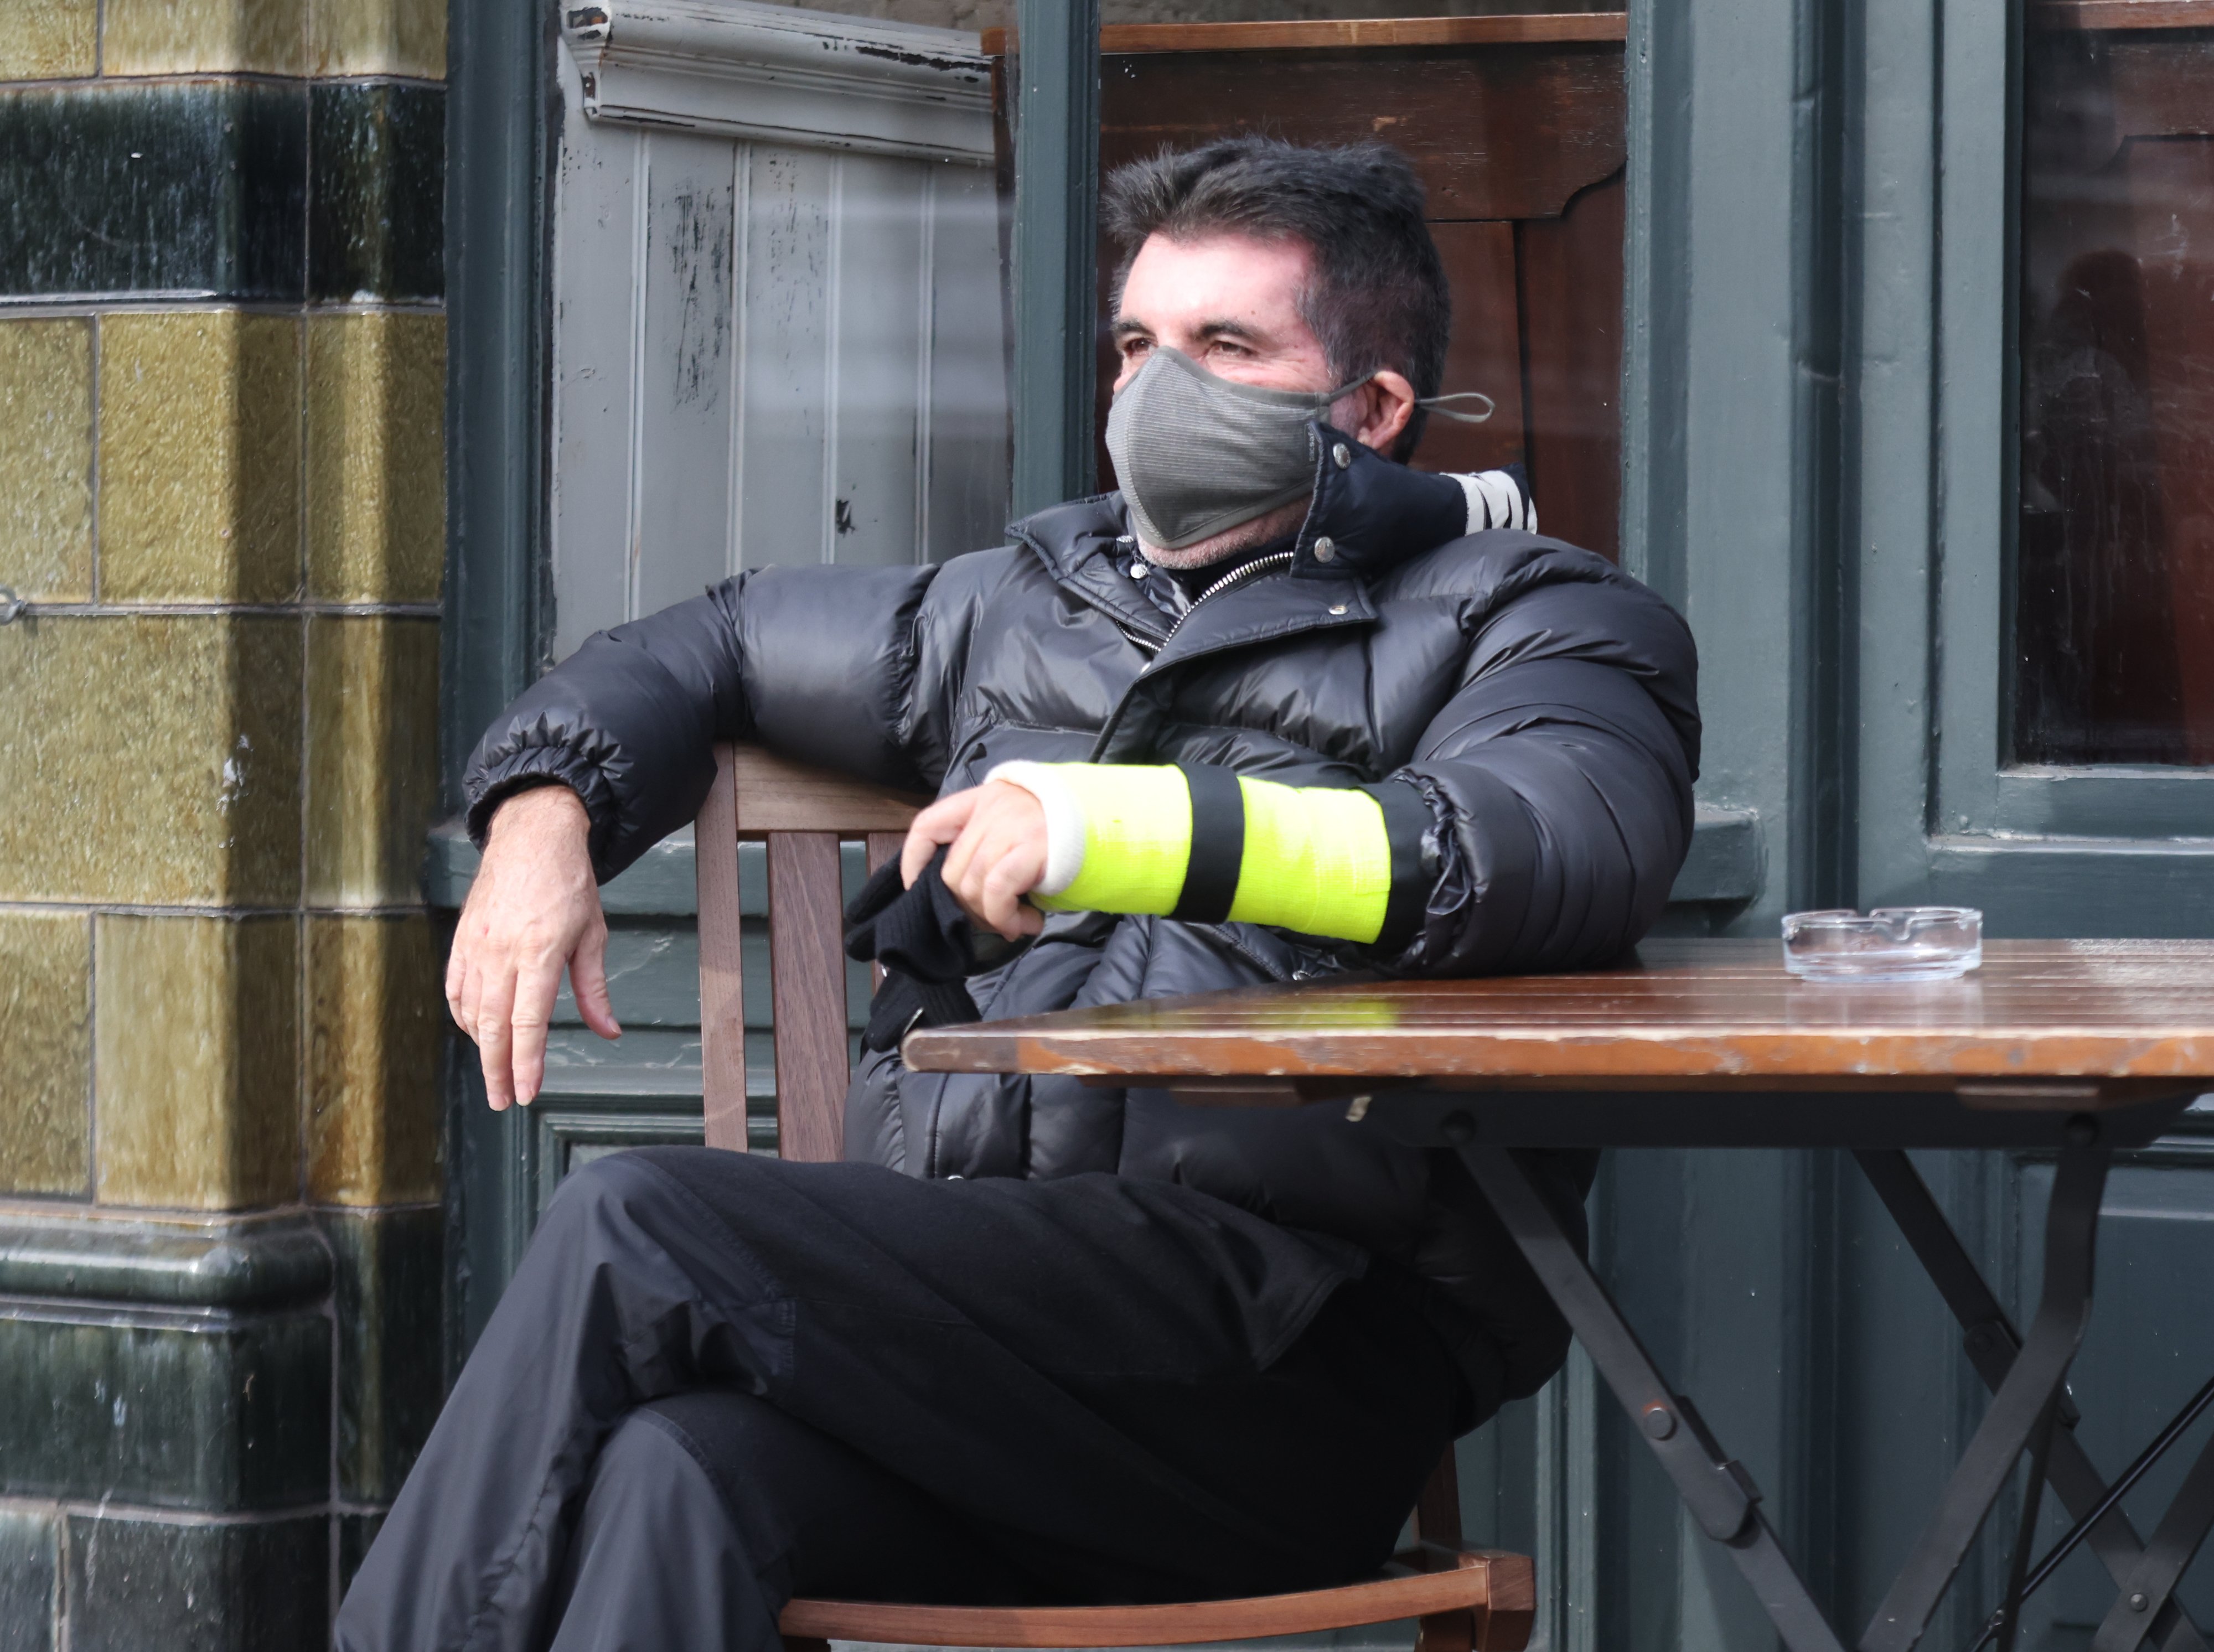 Simon Cowell shows the broken arm he suffered in a bicycle accident last week as he sits outside The Castle pub in Holland Park wearing his cast on February 2, 2022, in London. | Source: Getty Images